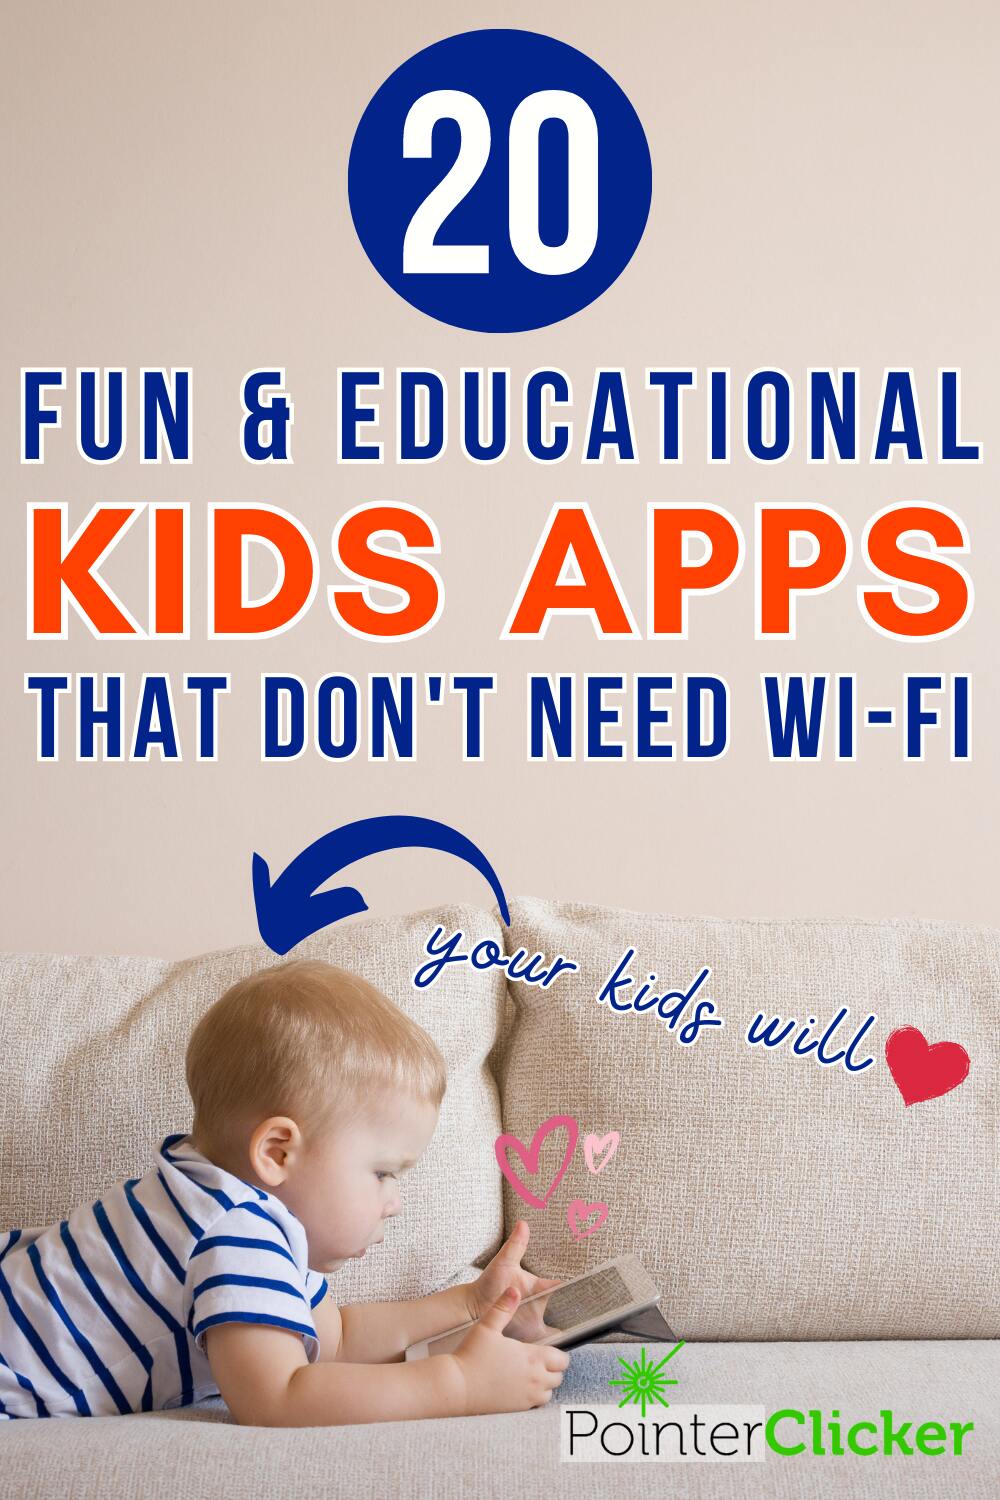 Fun Without Wi-Fi: Top Applications for Kids That Don’t Need Wi-Fi